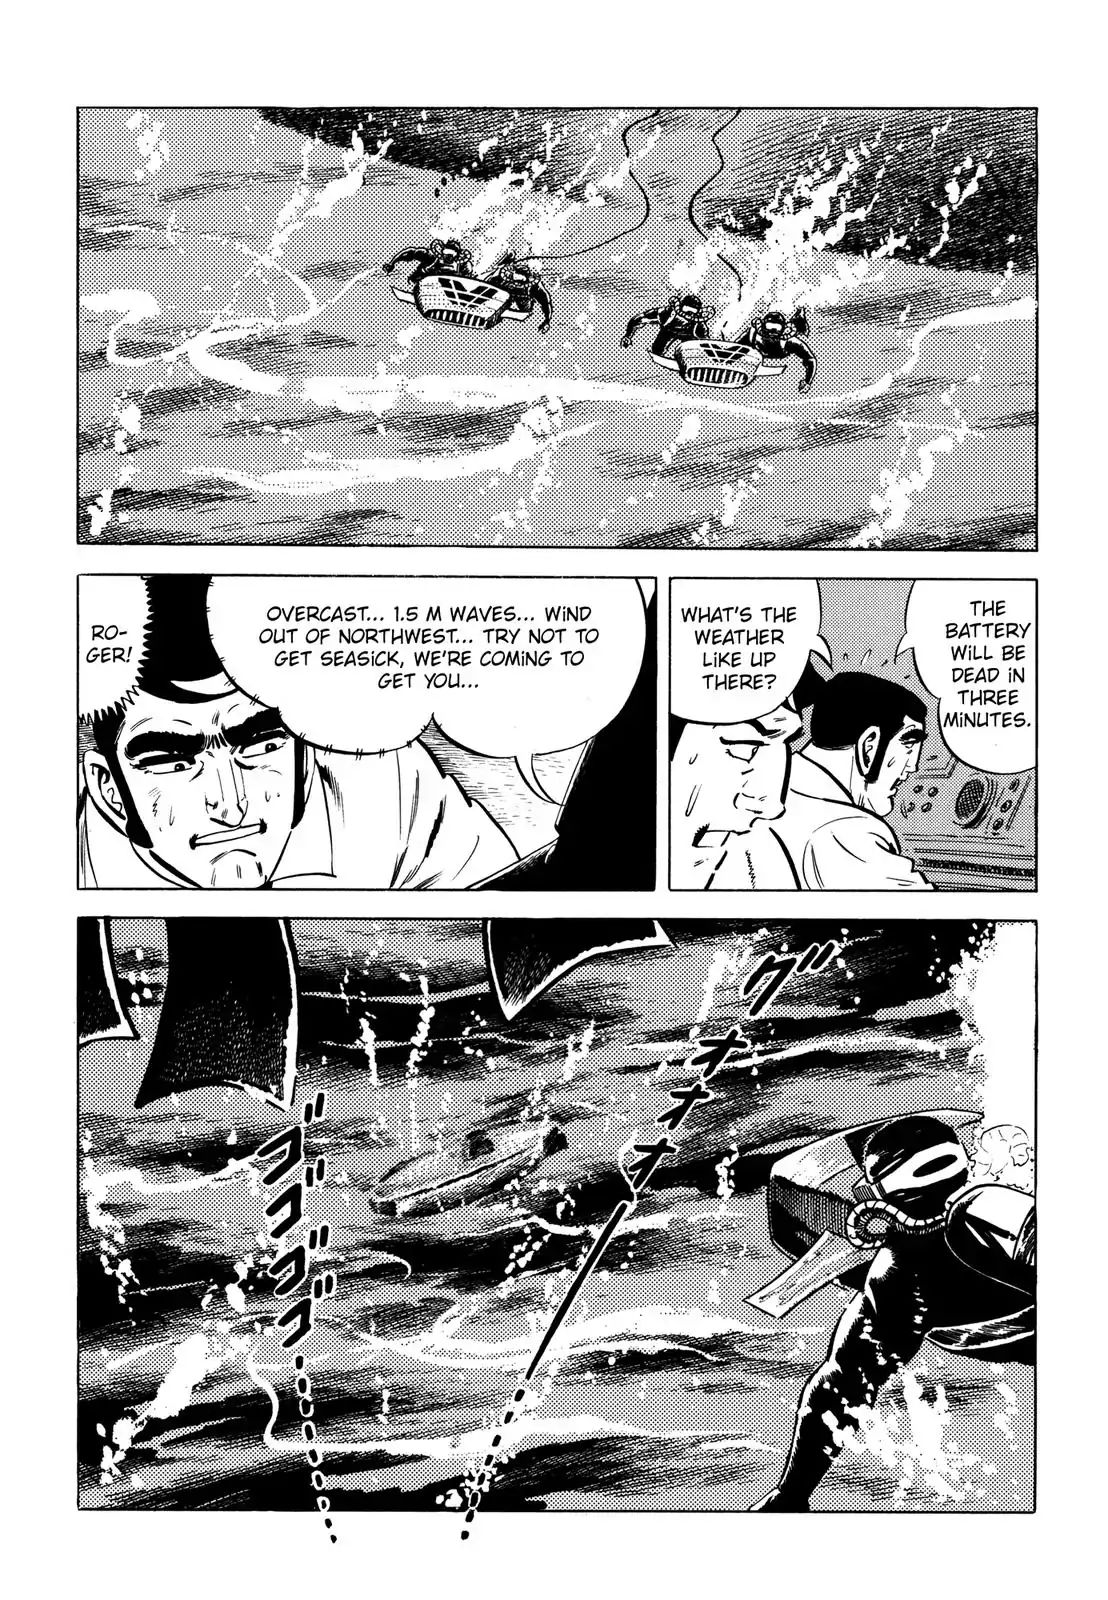 Japan Sinks (Takao Saito) Vol.2 Chapter 6: The Sinking Country